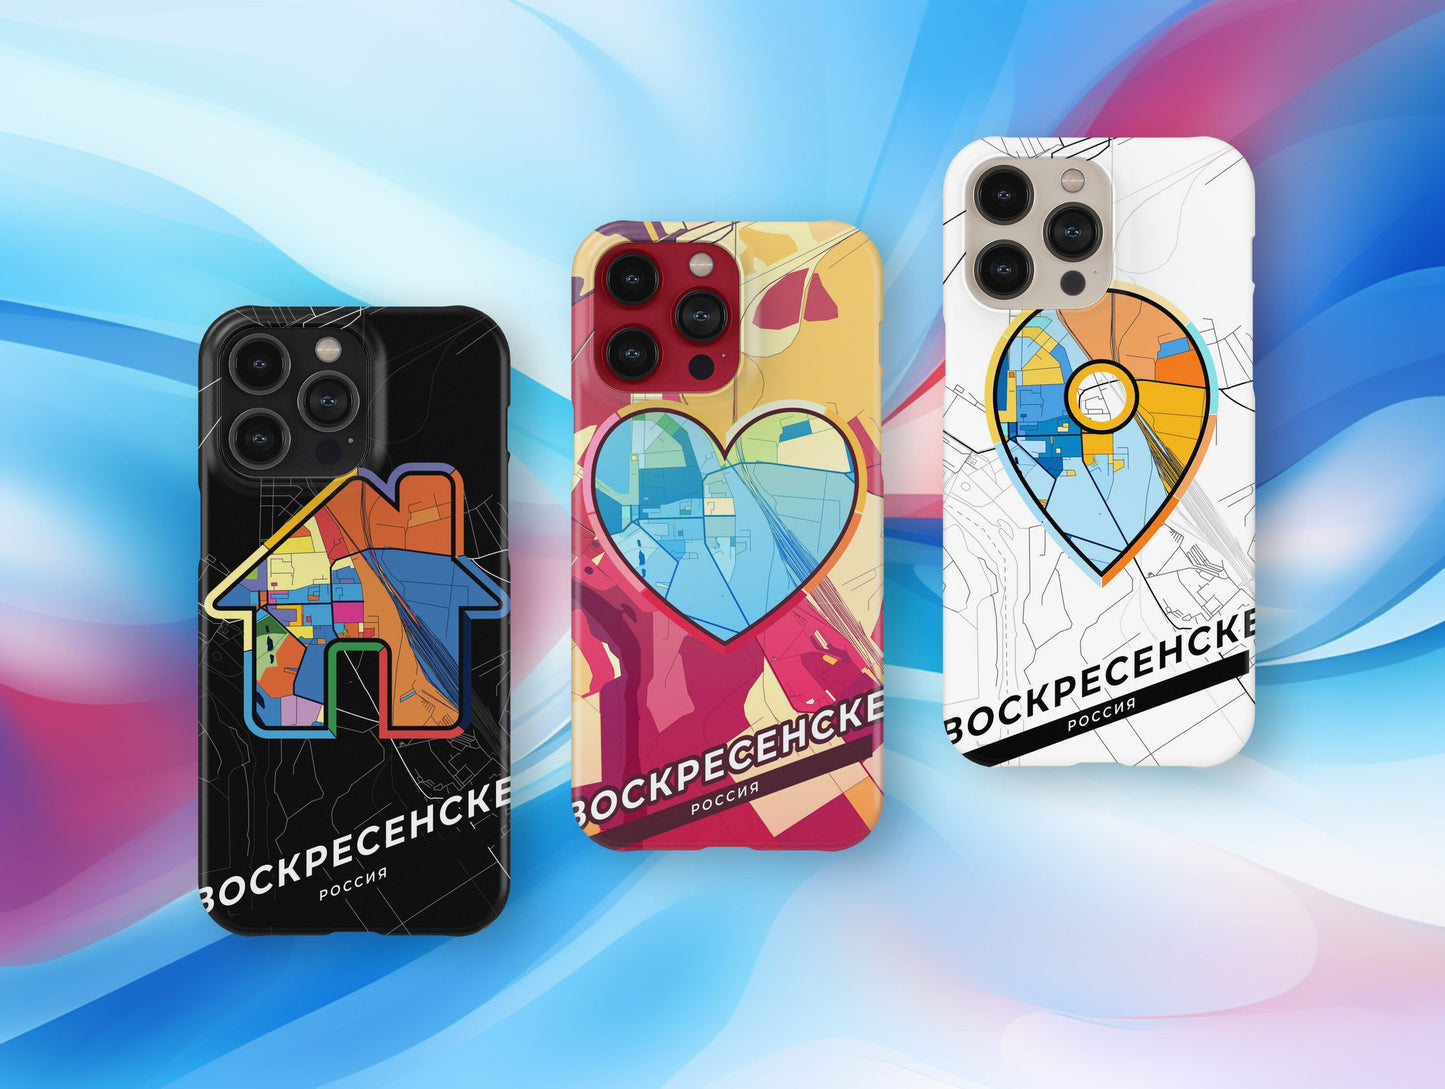 Voskresensk Russia slim phone case with colorful icon